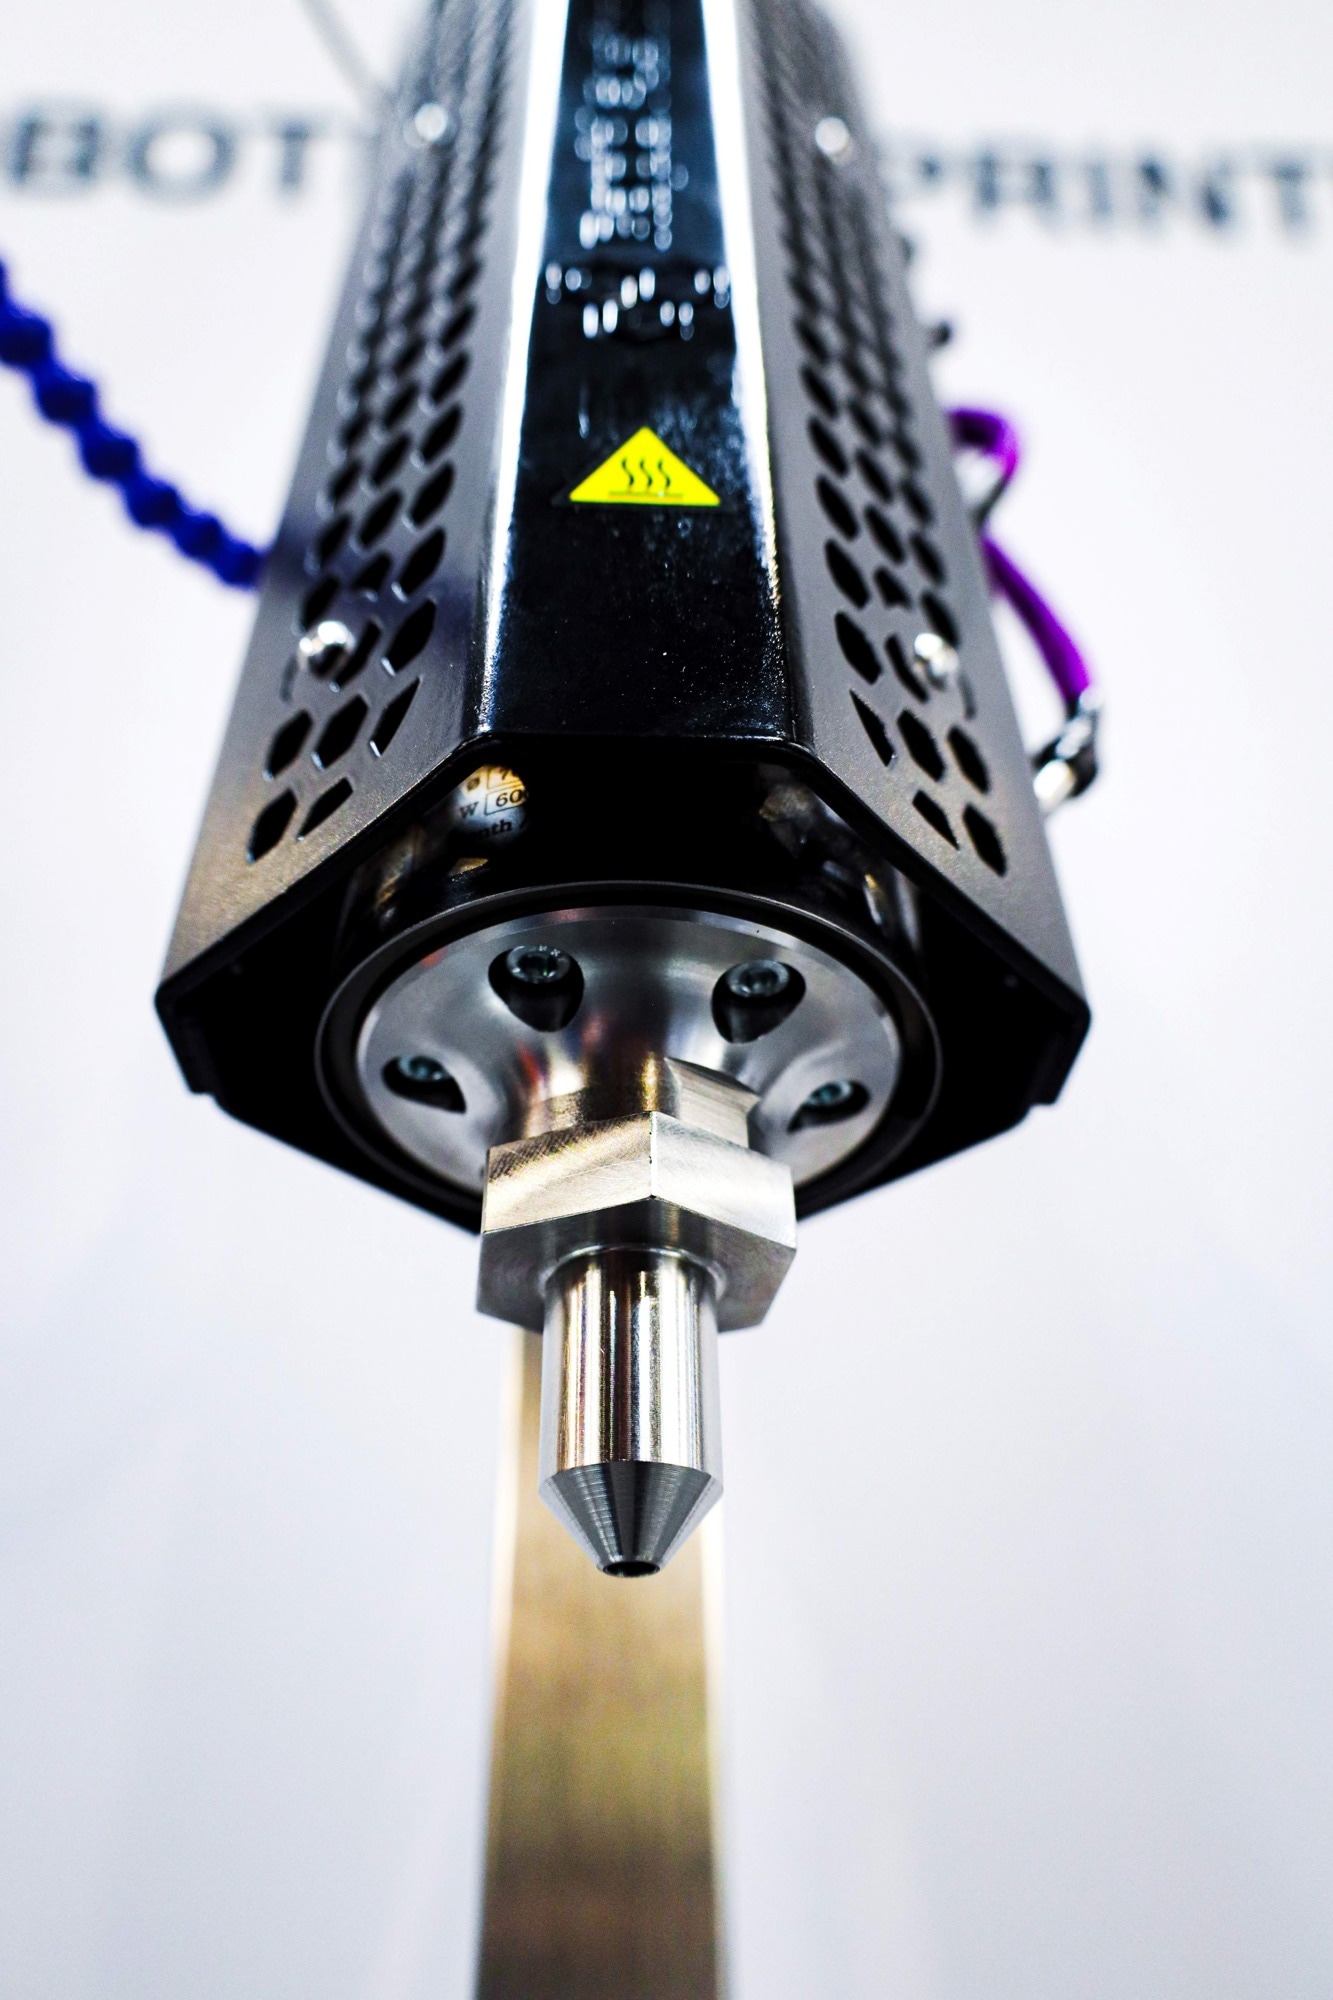 Groundbreaking Project to Bring High-Value 3D Printing to UK Manufacturing